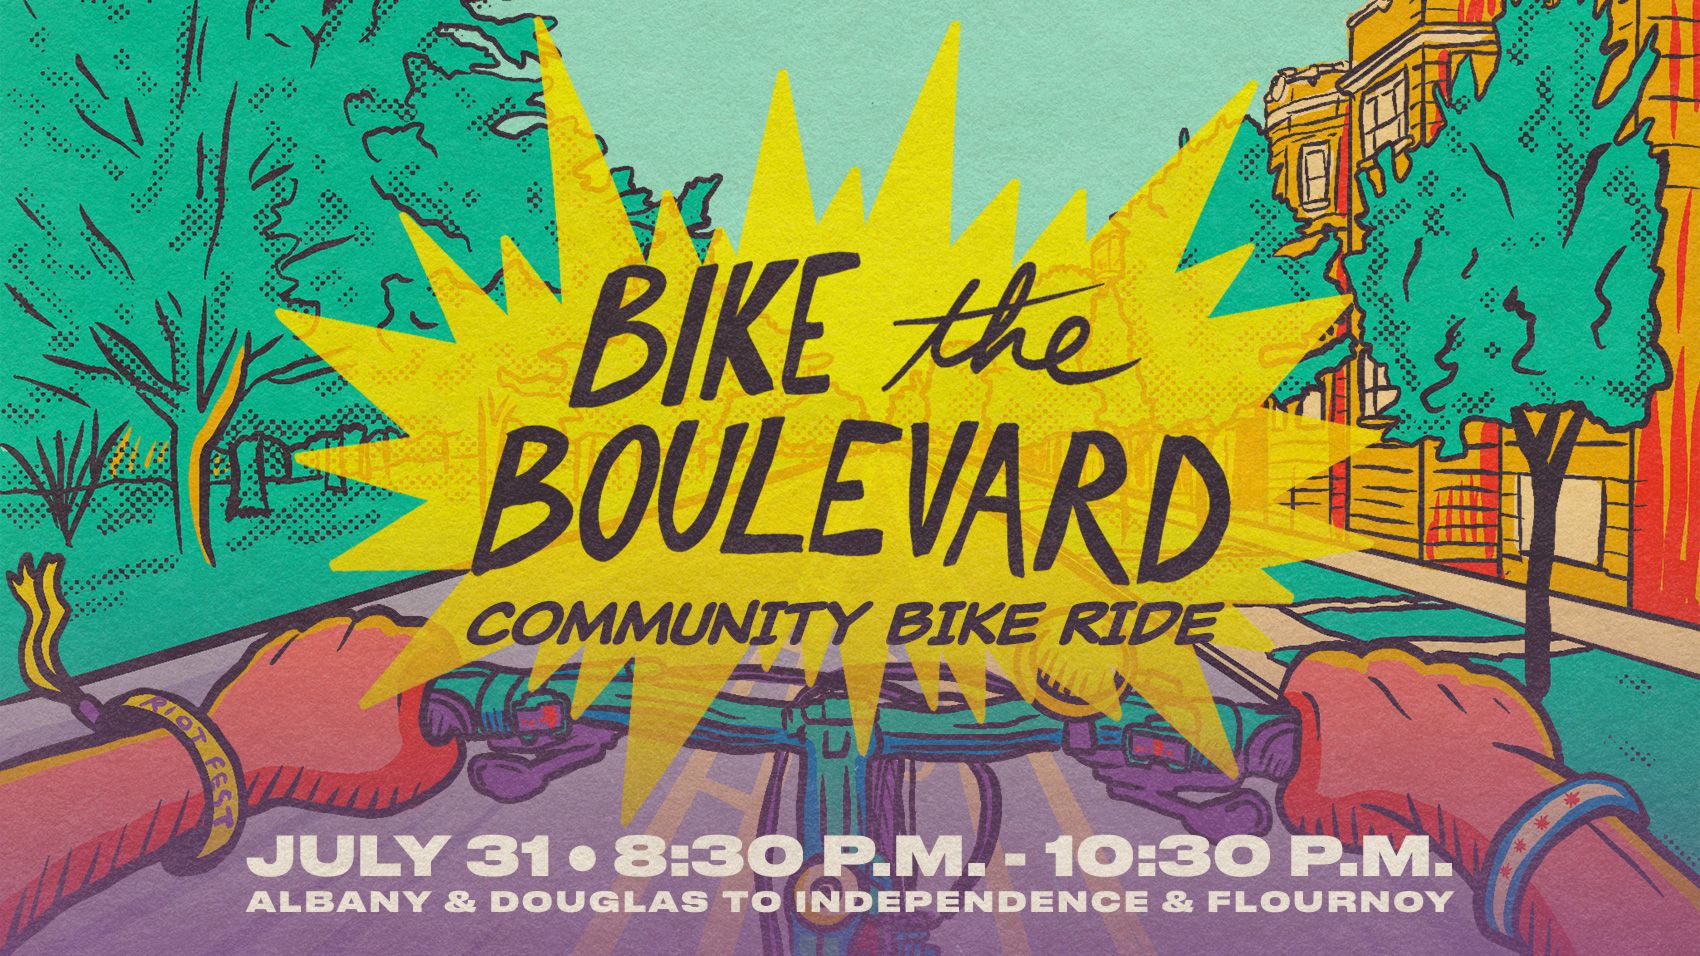 Bike the Boulevard: A Community Bike Ride for Public Safety